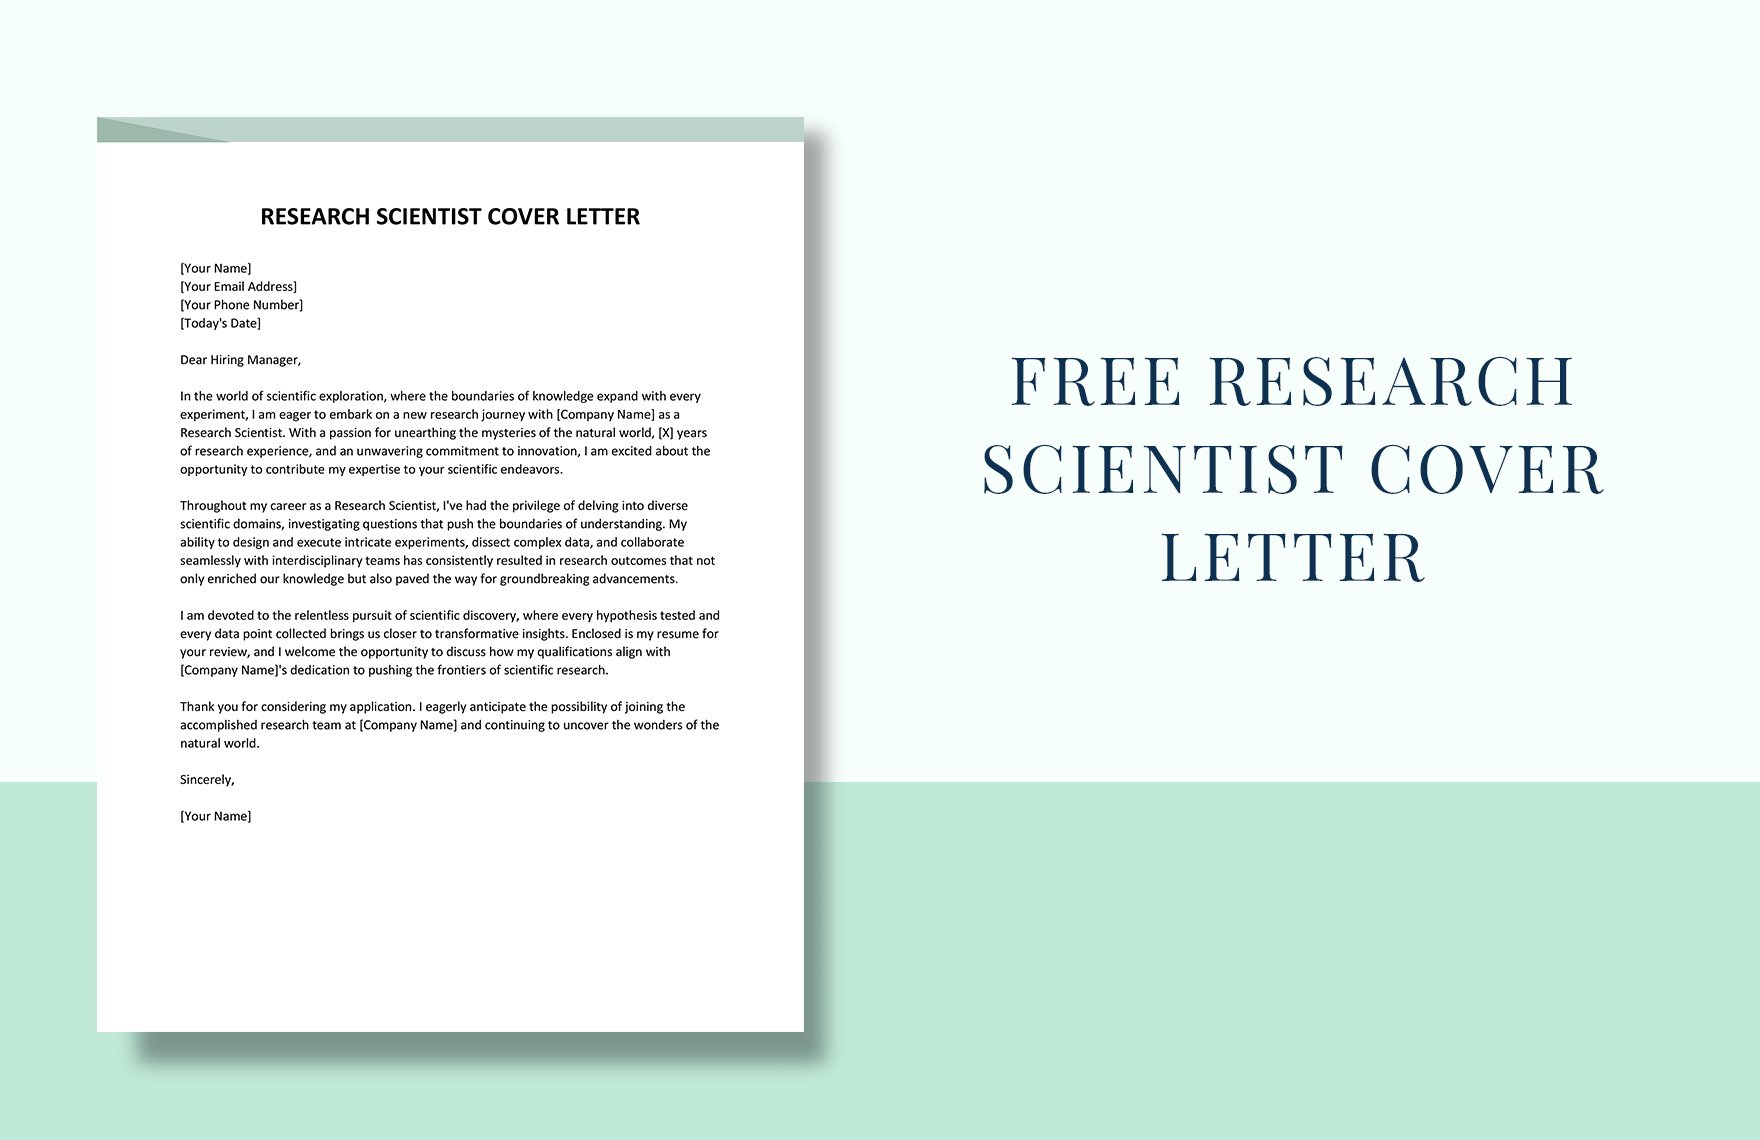 Research Scientist Cover Letter